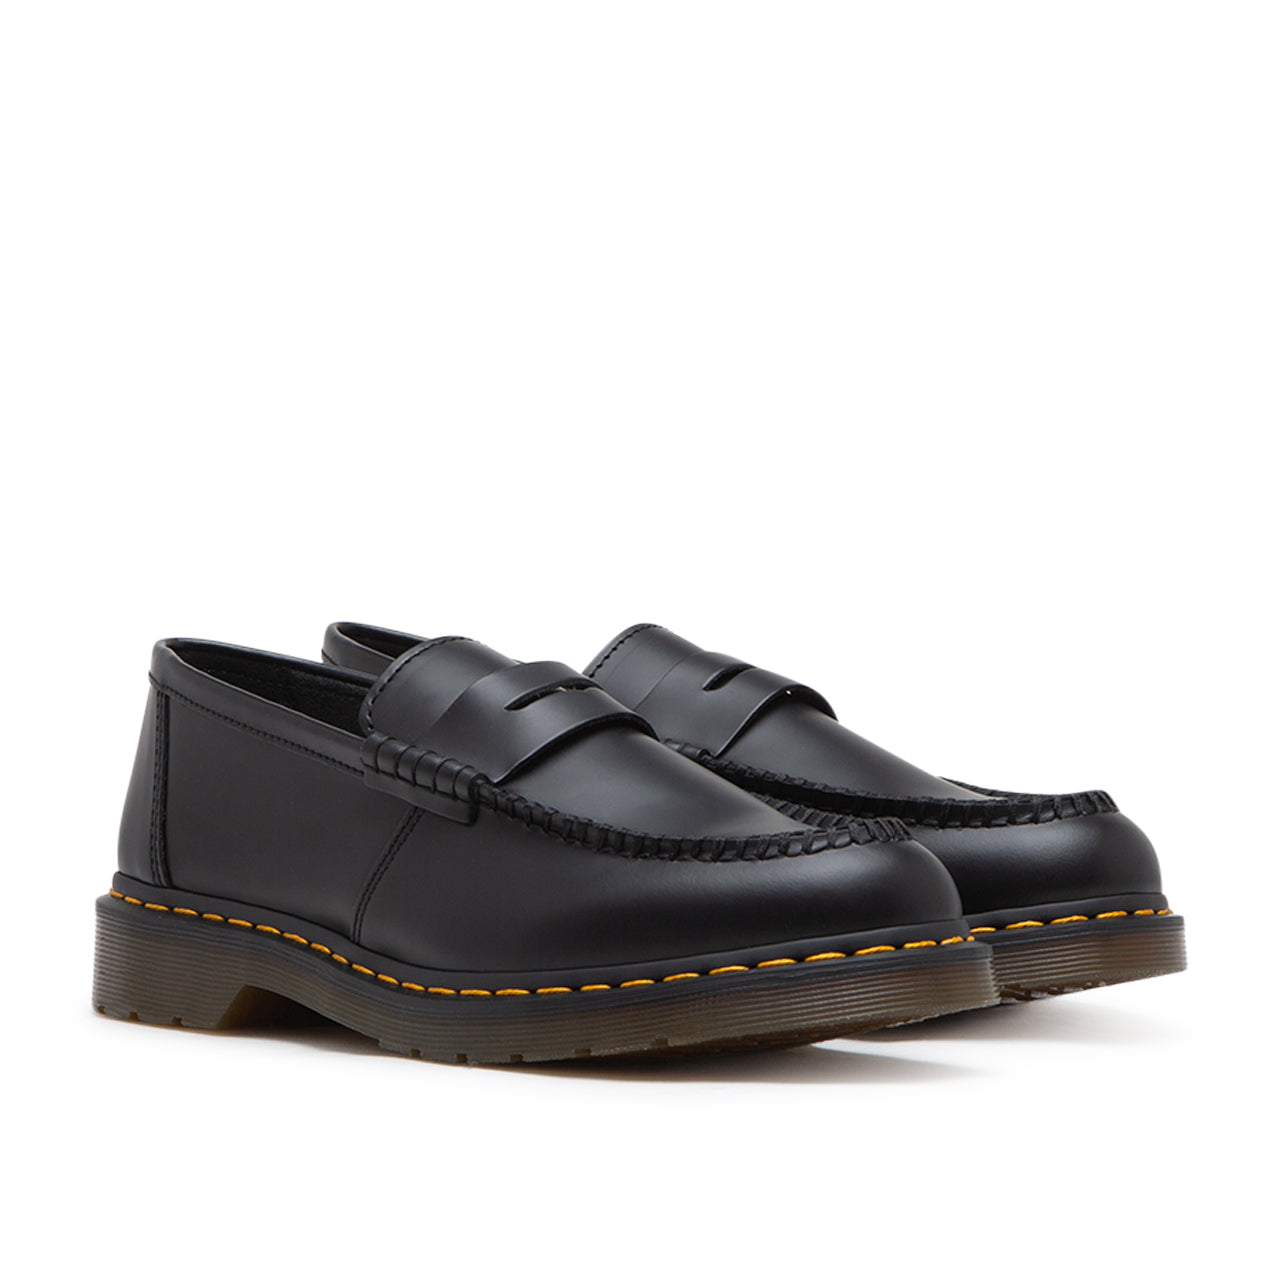 Dr. Martens Penton Smooth Leather Loafers (Schwarz)  - Allike Store